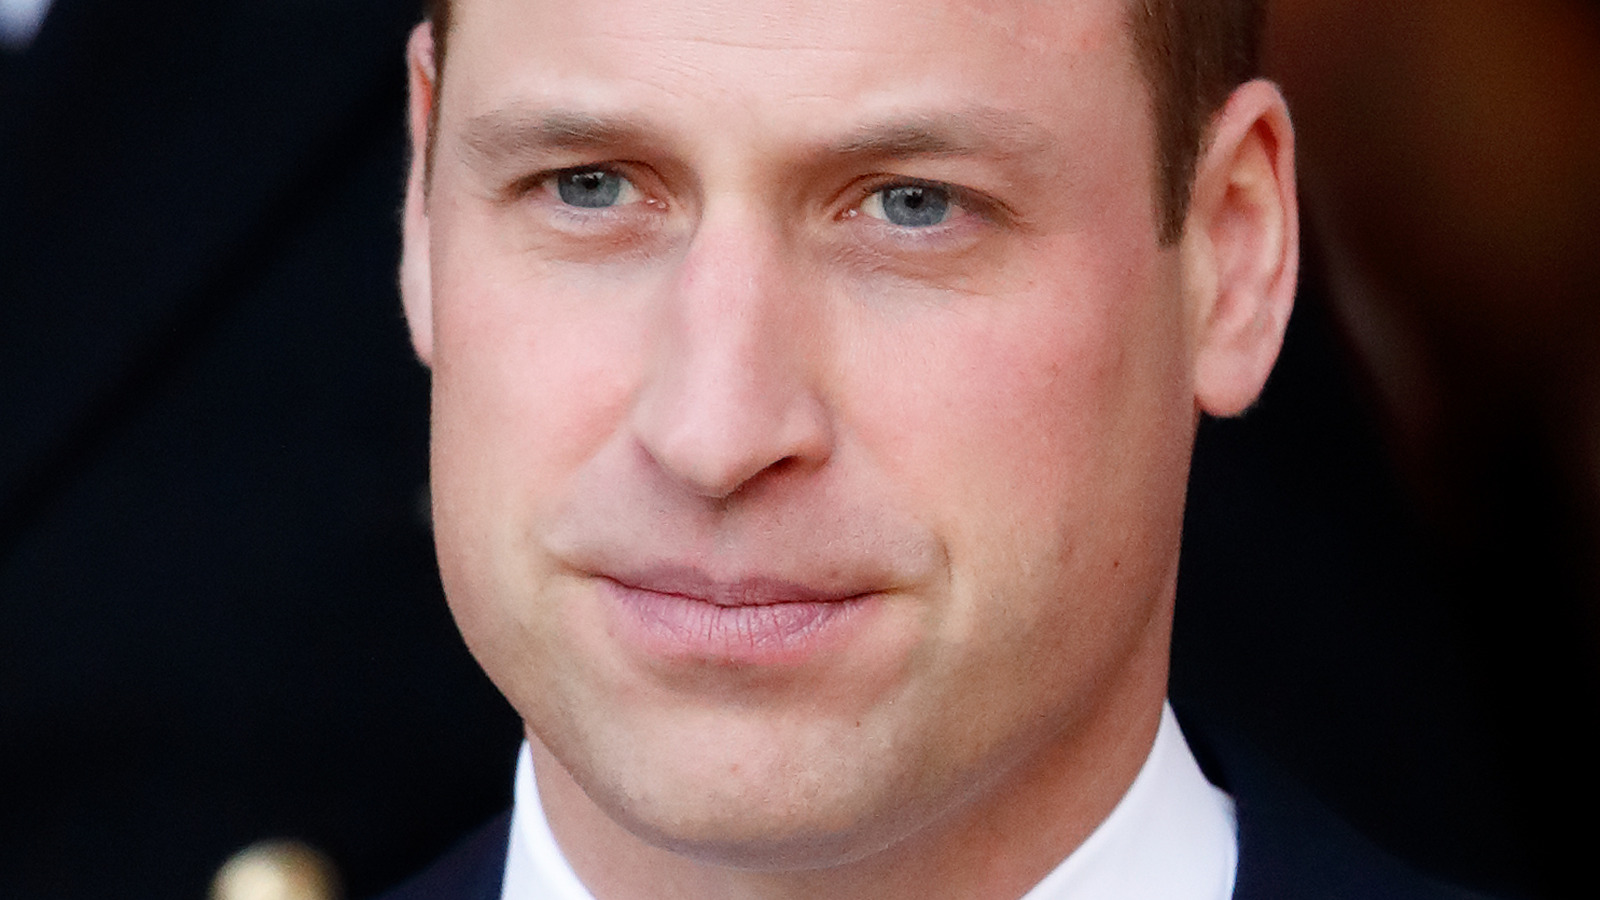 Royal Expert Explains Why Harry And William Are Not Ready To Make Up